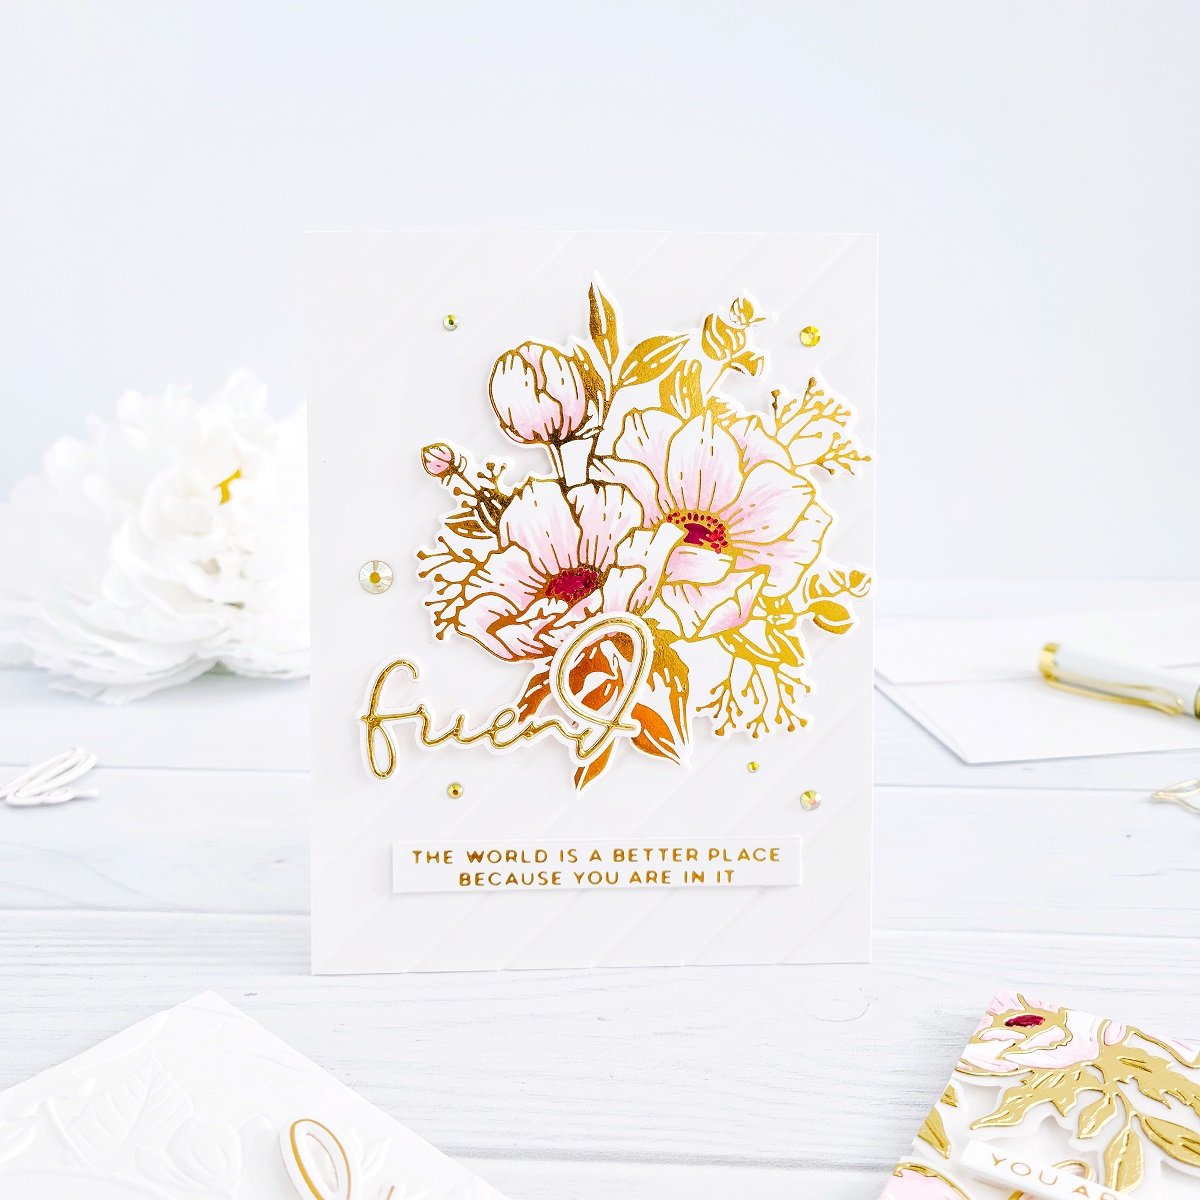 Create fantastic metallic blends and accents on your cards with our gilding  wax tutorial - Gathered